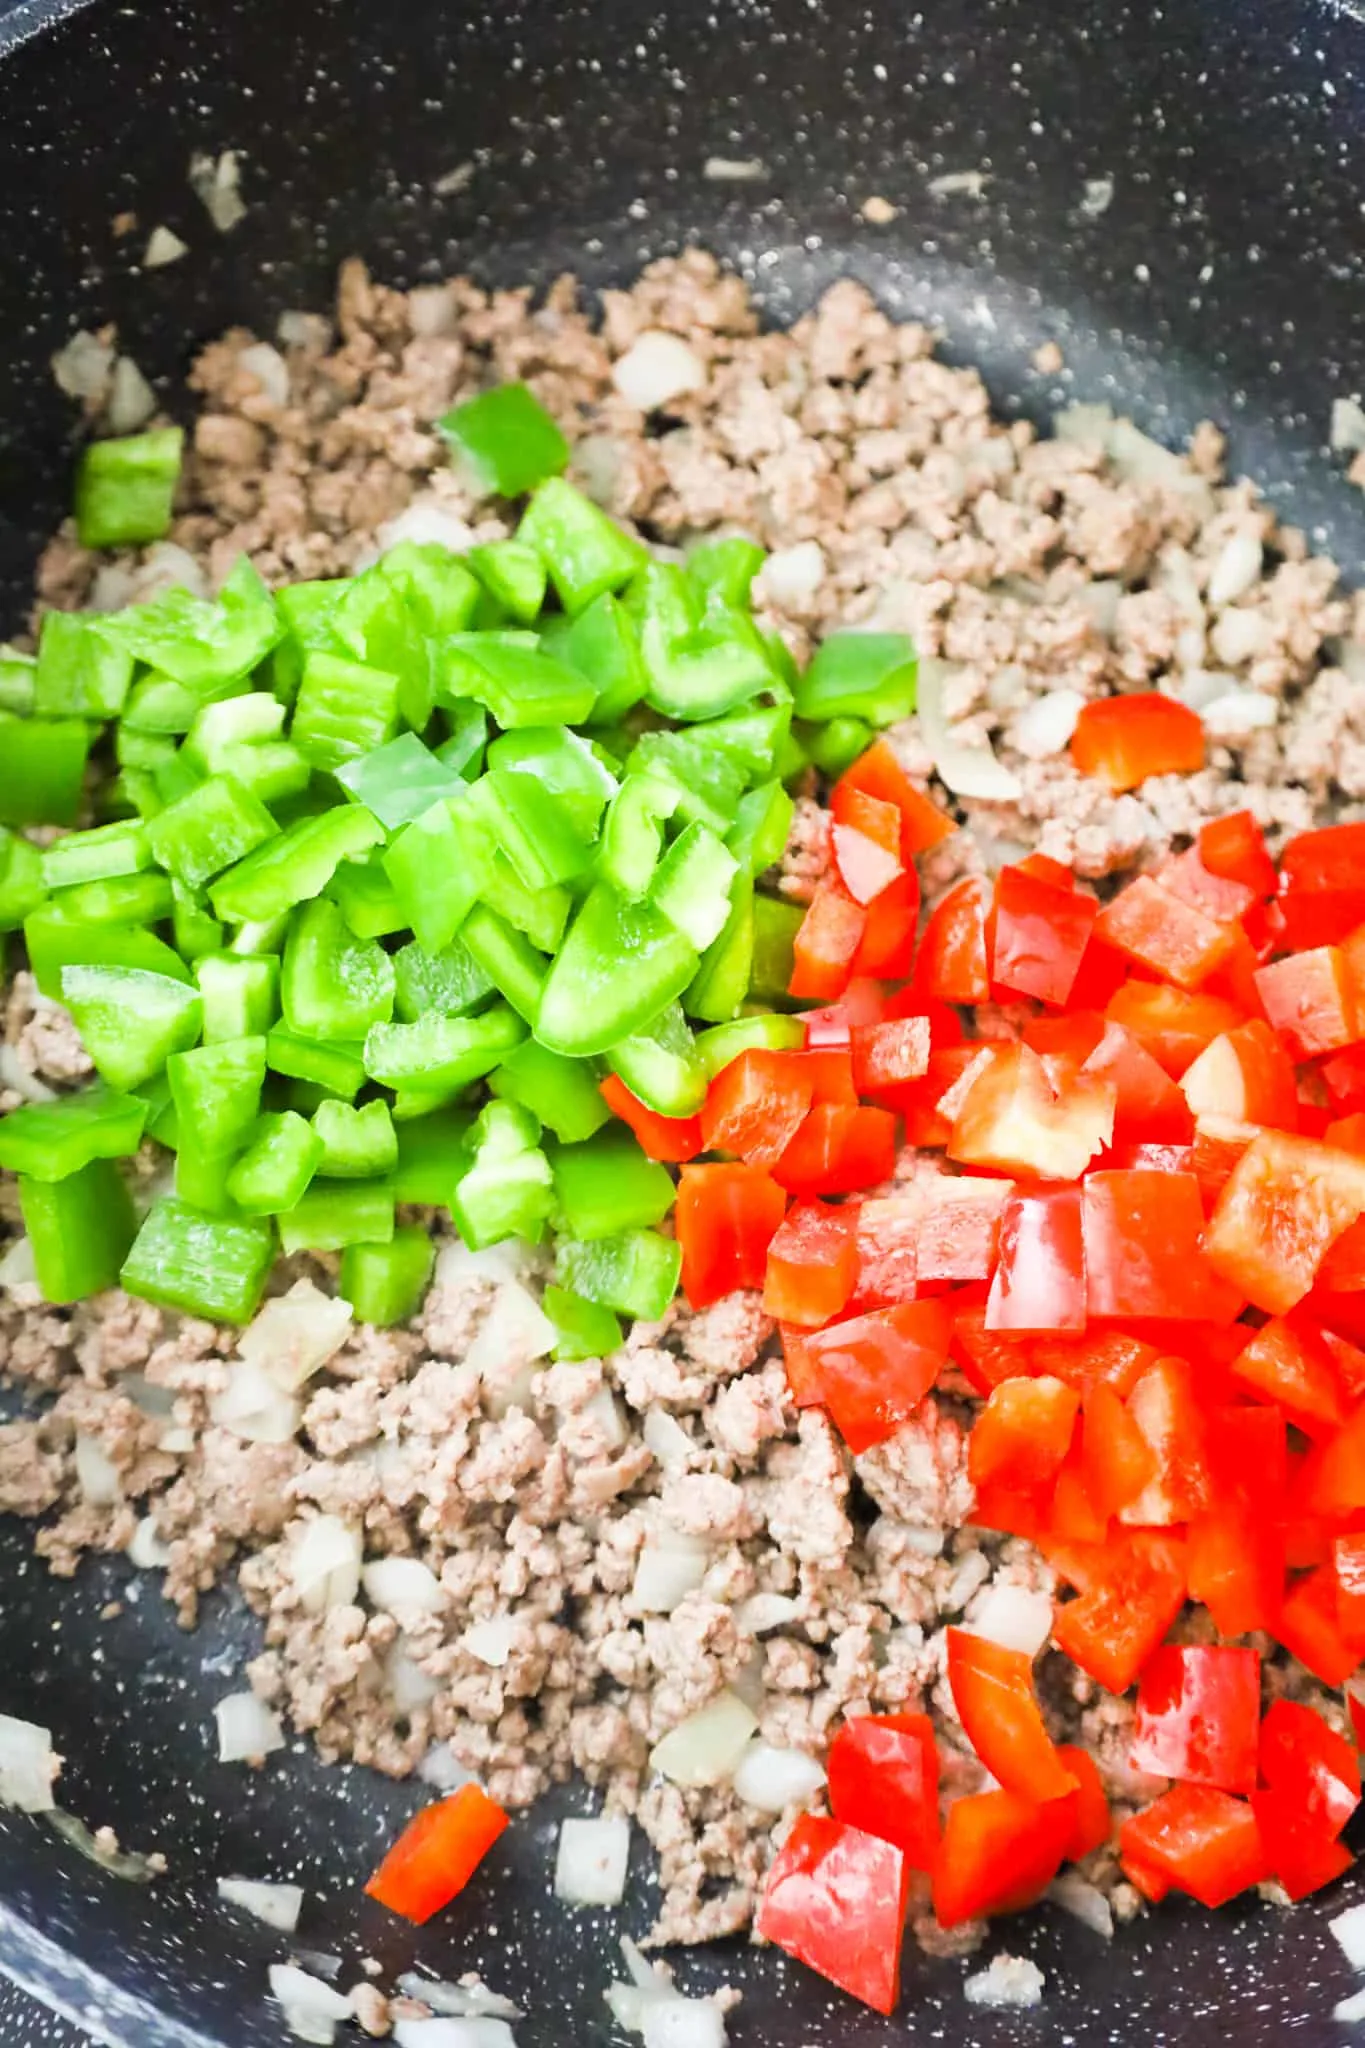 diced red and green peppers on top of cooked ground beef in a saute pan